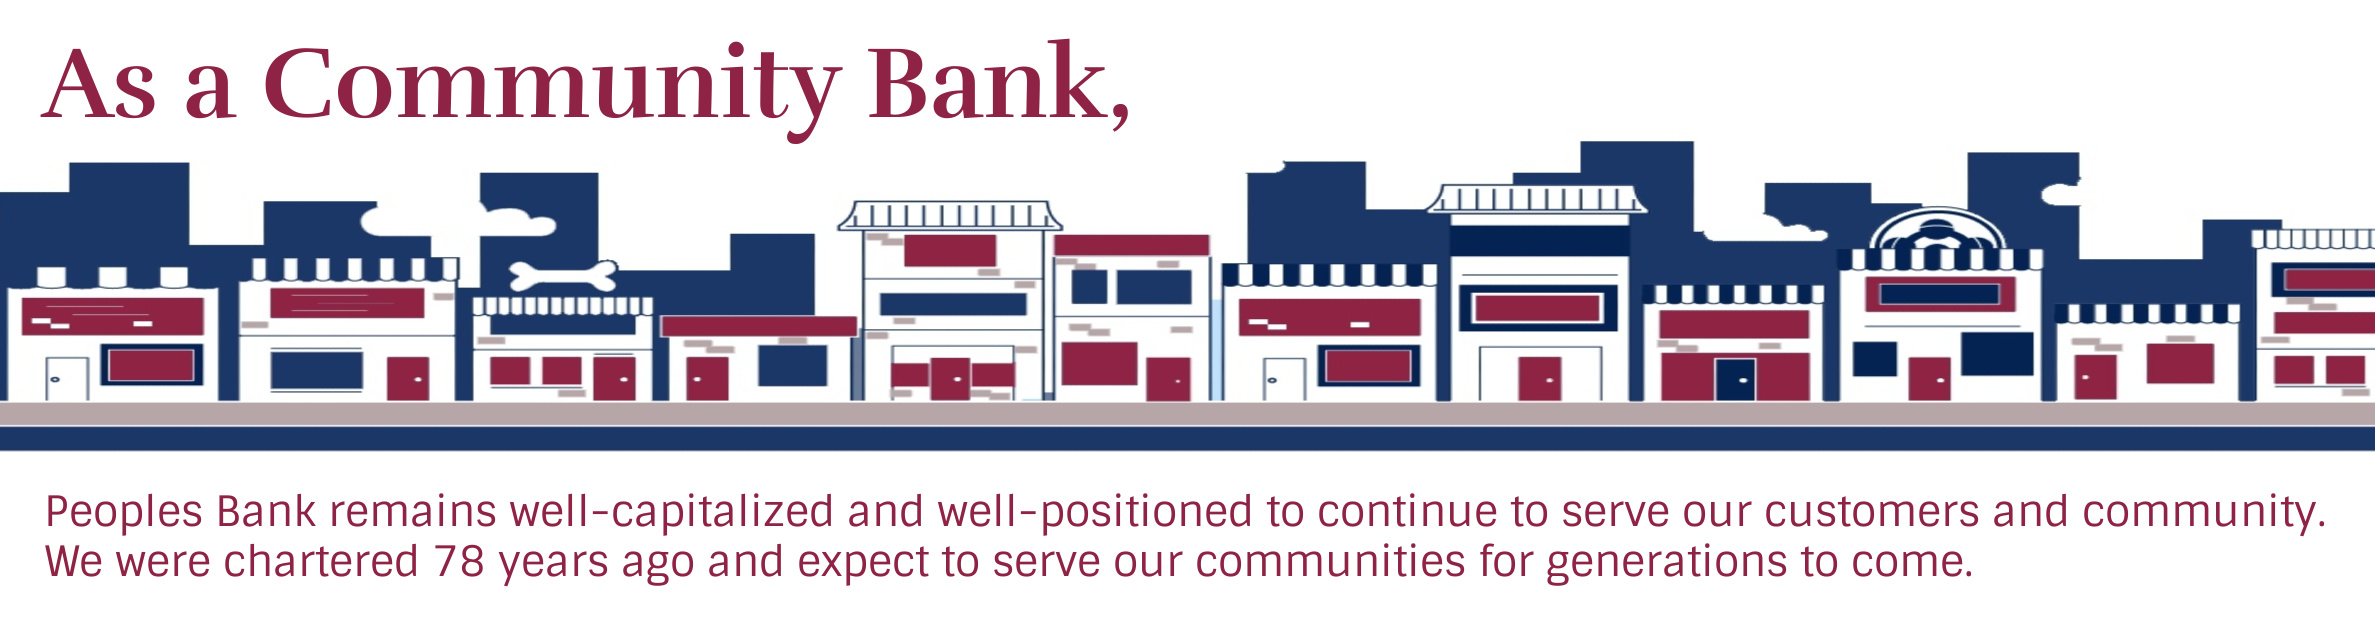 As a Community Bank, Peoples Bank remains well-capitalized and well-positioned to continue to serve our customers and community. 
We were chartered 78 years ago and expect to serve our communities for generations to come.